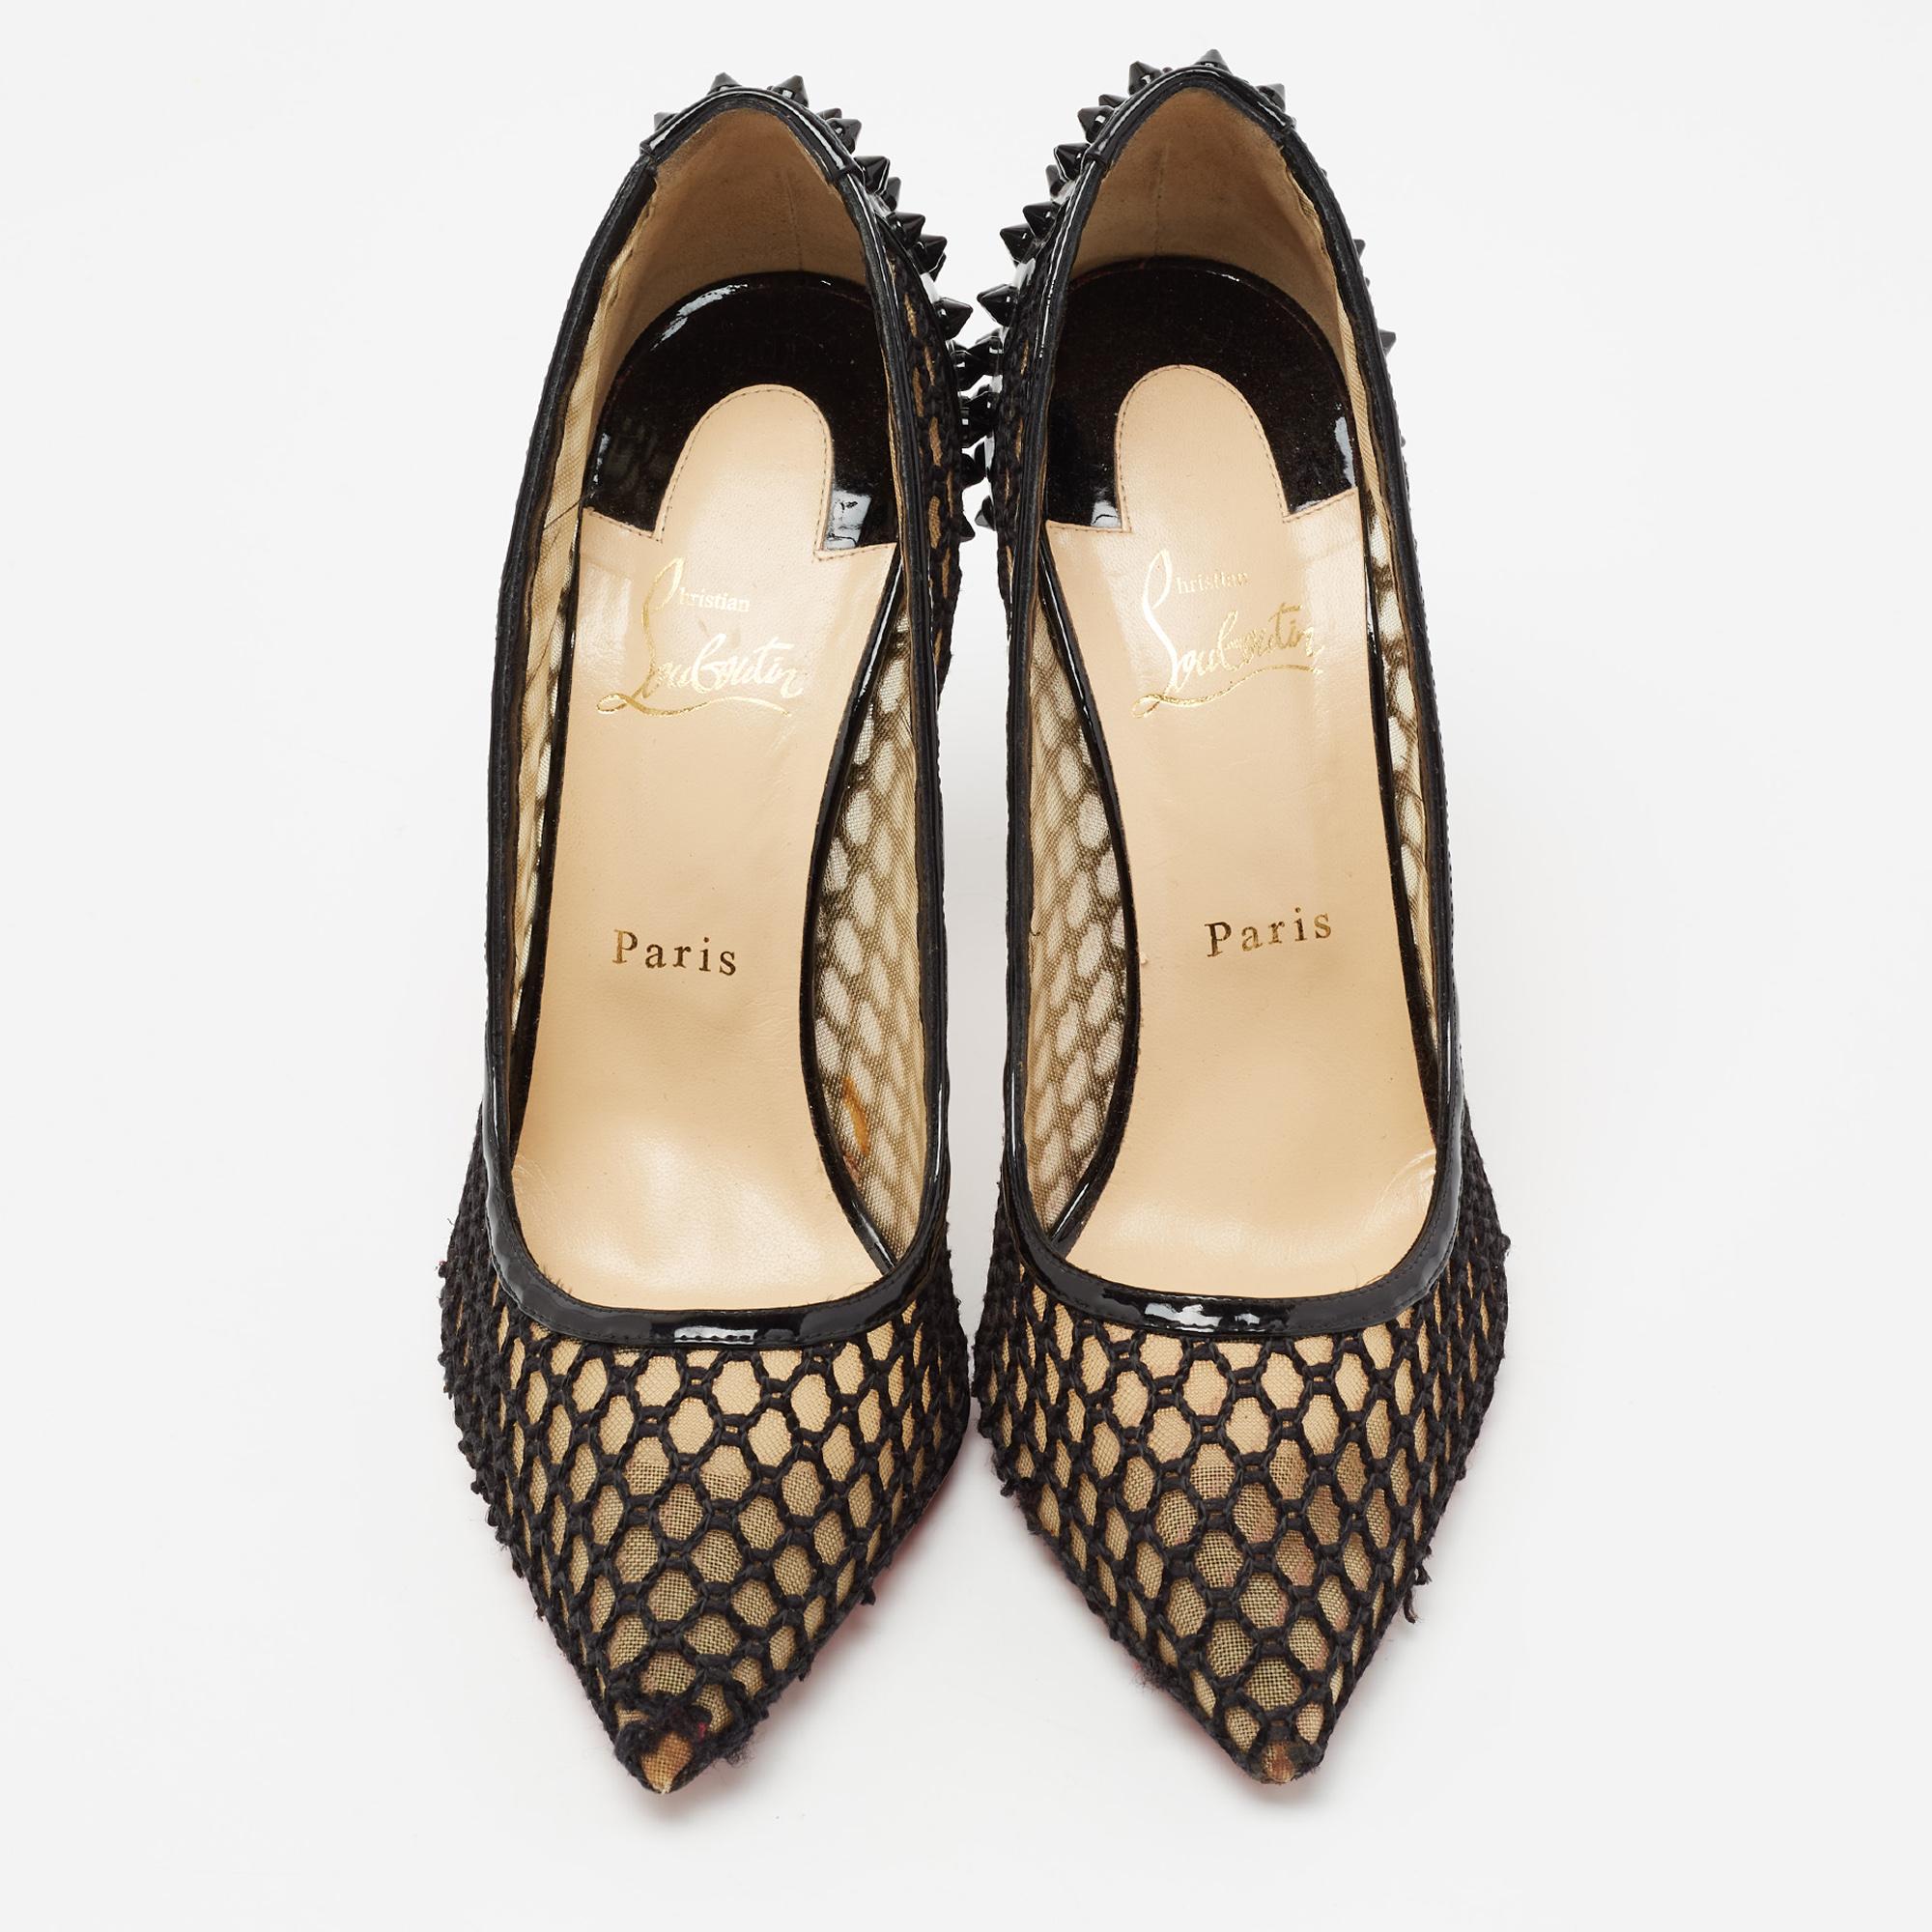 Fabulous and elegant, these Guni pumps will make you fall in love with Christian Louboutin's style all over again. Neatly designed using black net and patent leather, these pumps are accentuated with pointed toes and slim heels. They have a slip-on